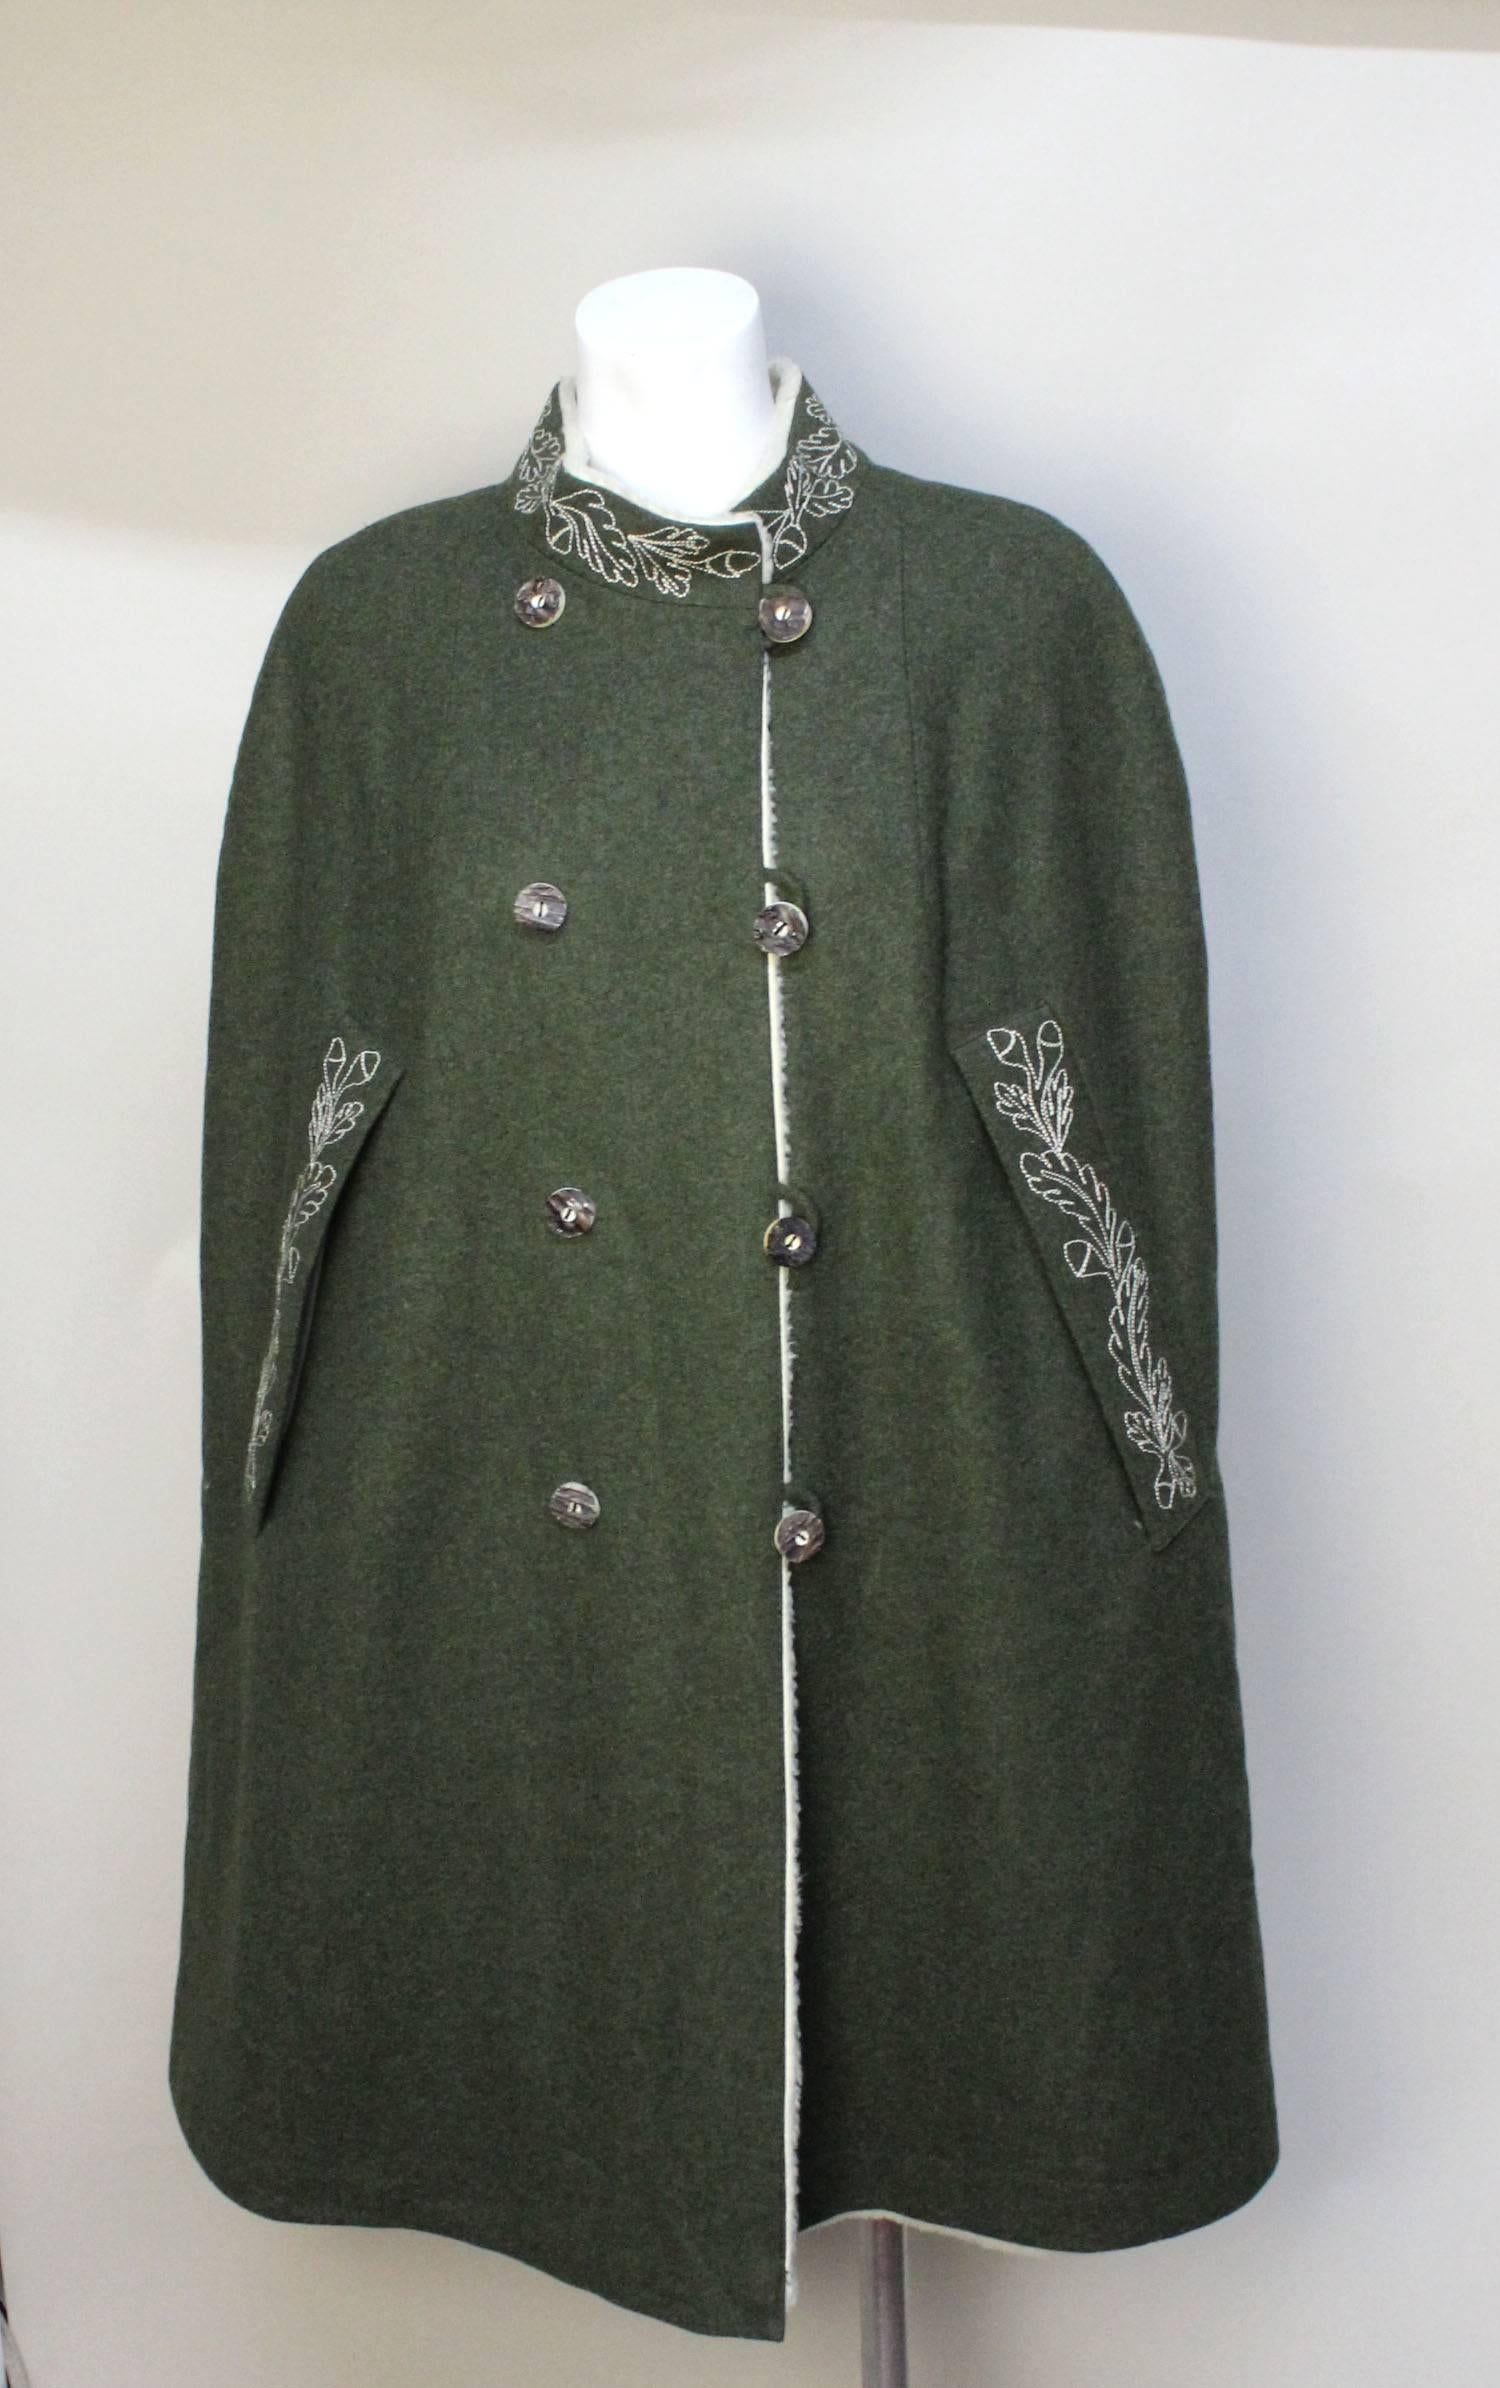 This classic vintage Tyrolean style cape has wonderful lines and works beautifully with current fashion. There is striking embroidery along the collar and armholes. It is double breasted with carved horn buttons. It is fully lined in a creme sheared